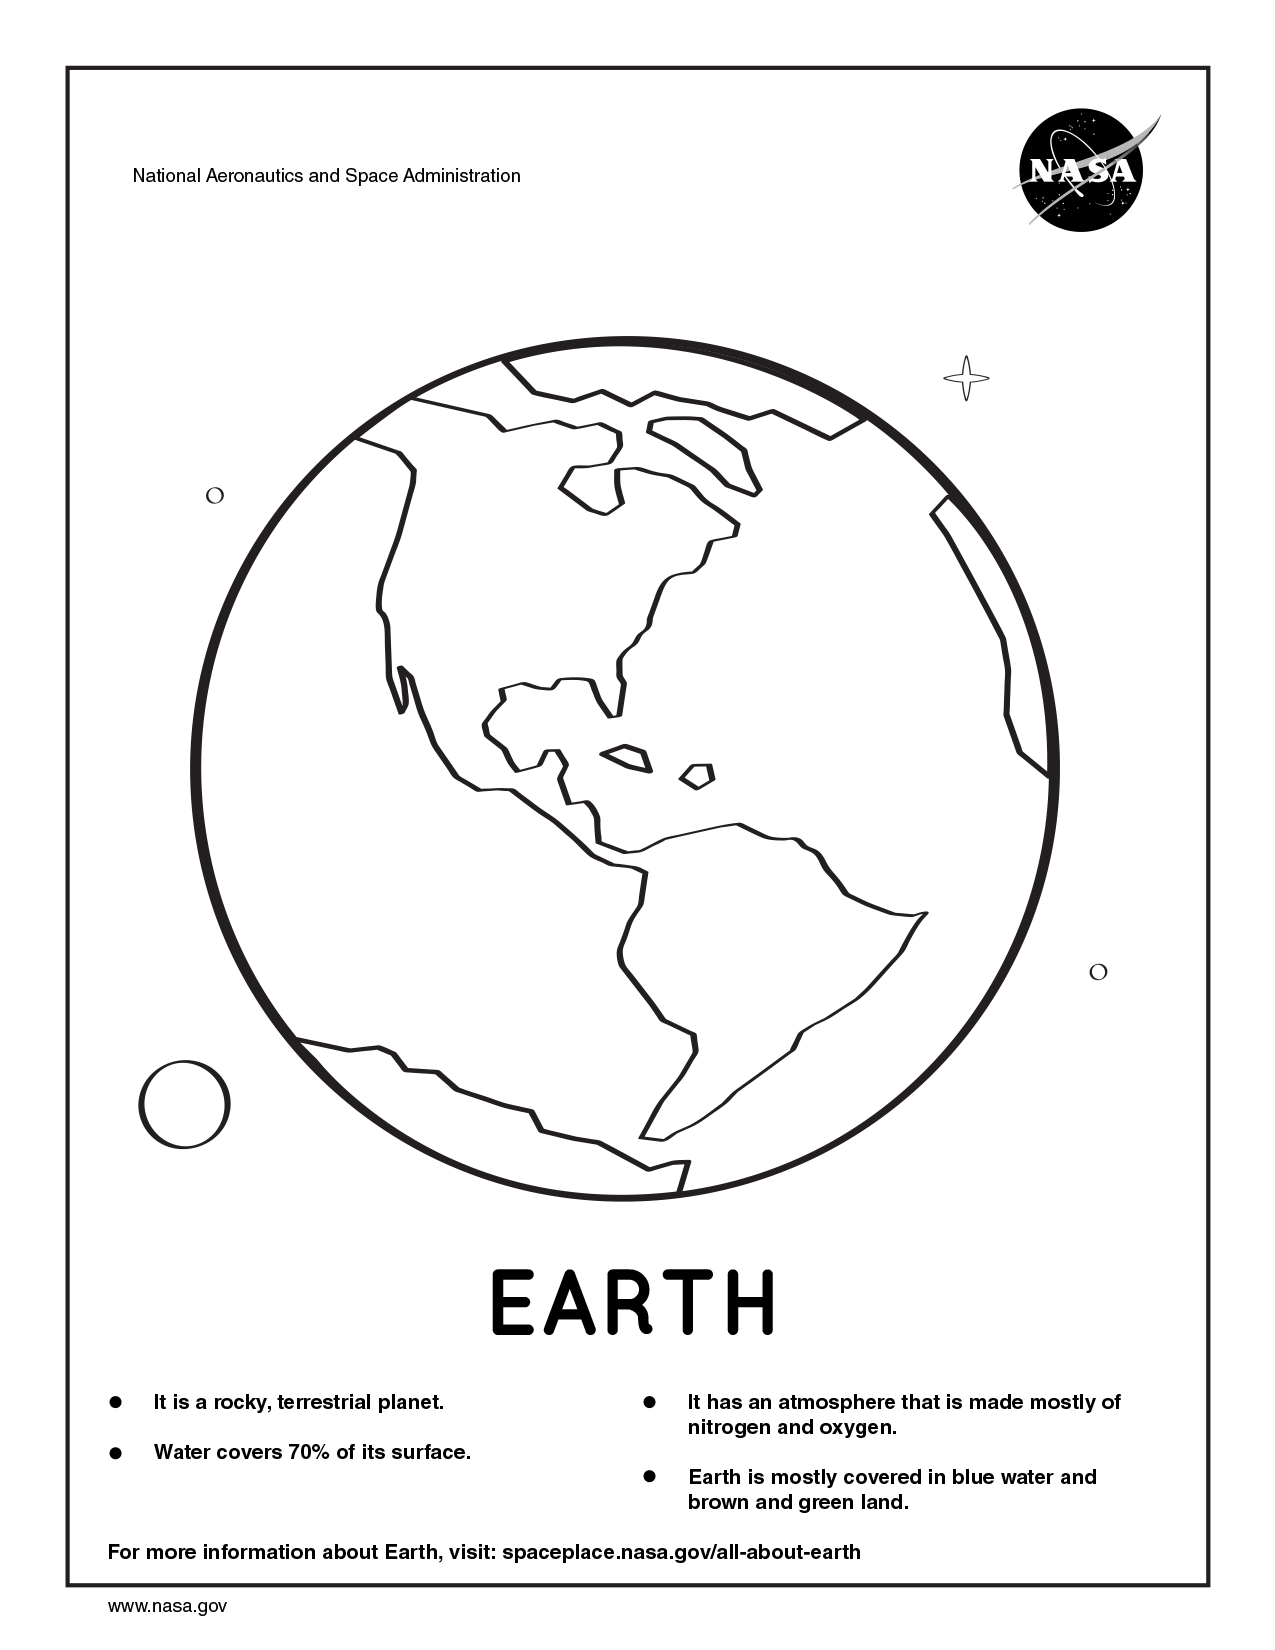 Coloring page for Earth.